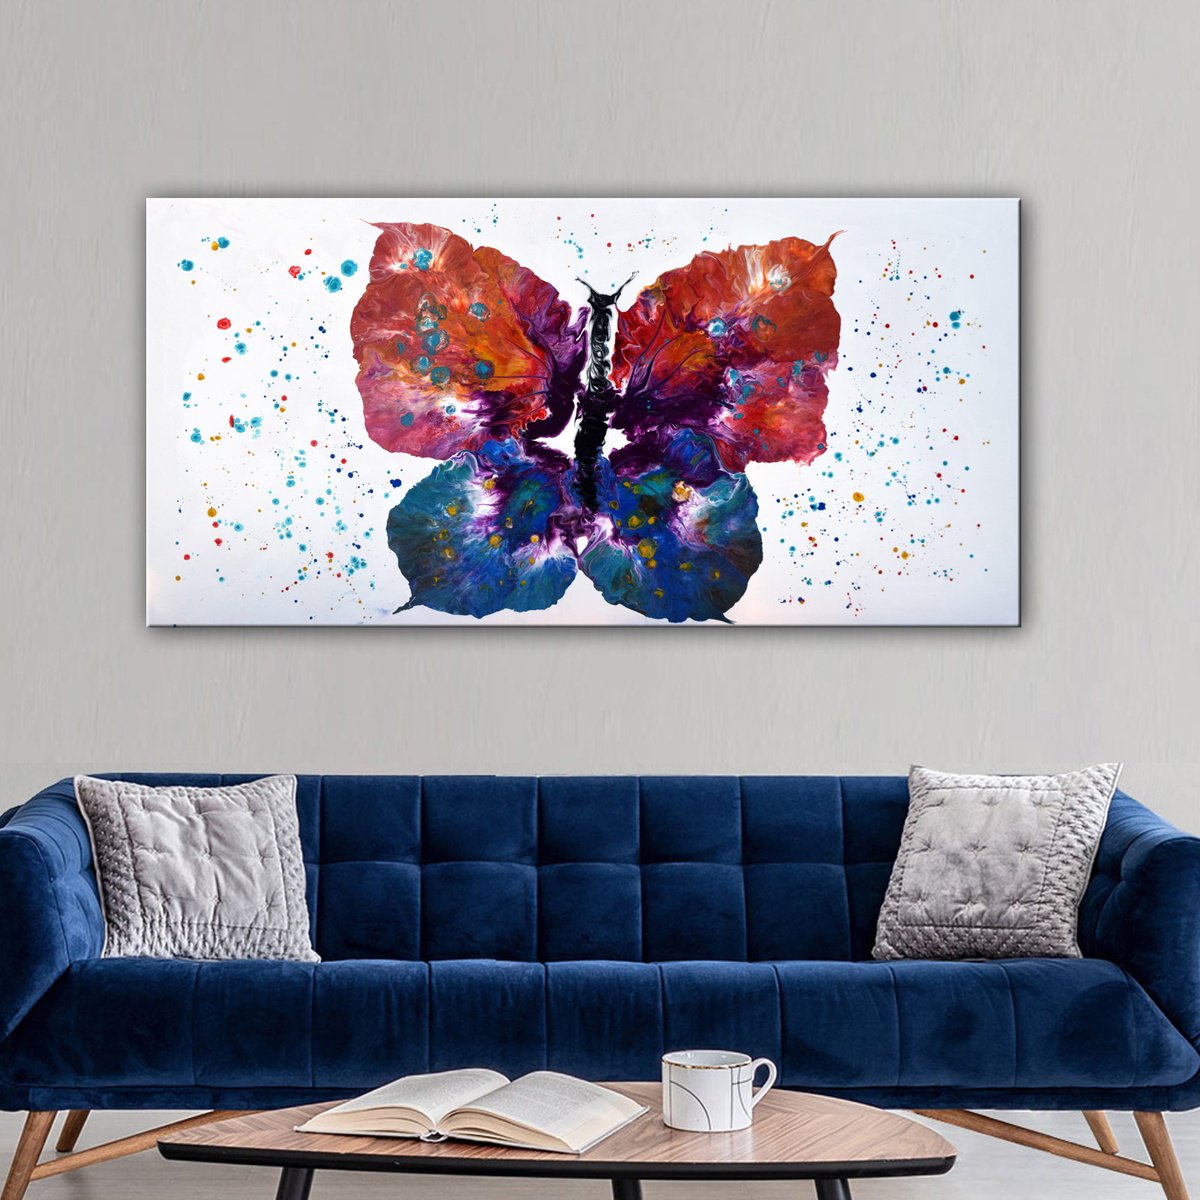 Batterfly - Extra Large Abstract Painting by Nataliya Stupak